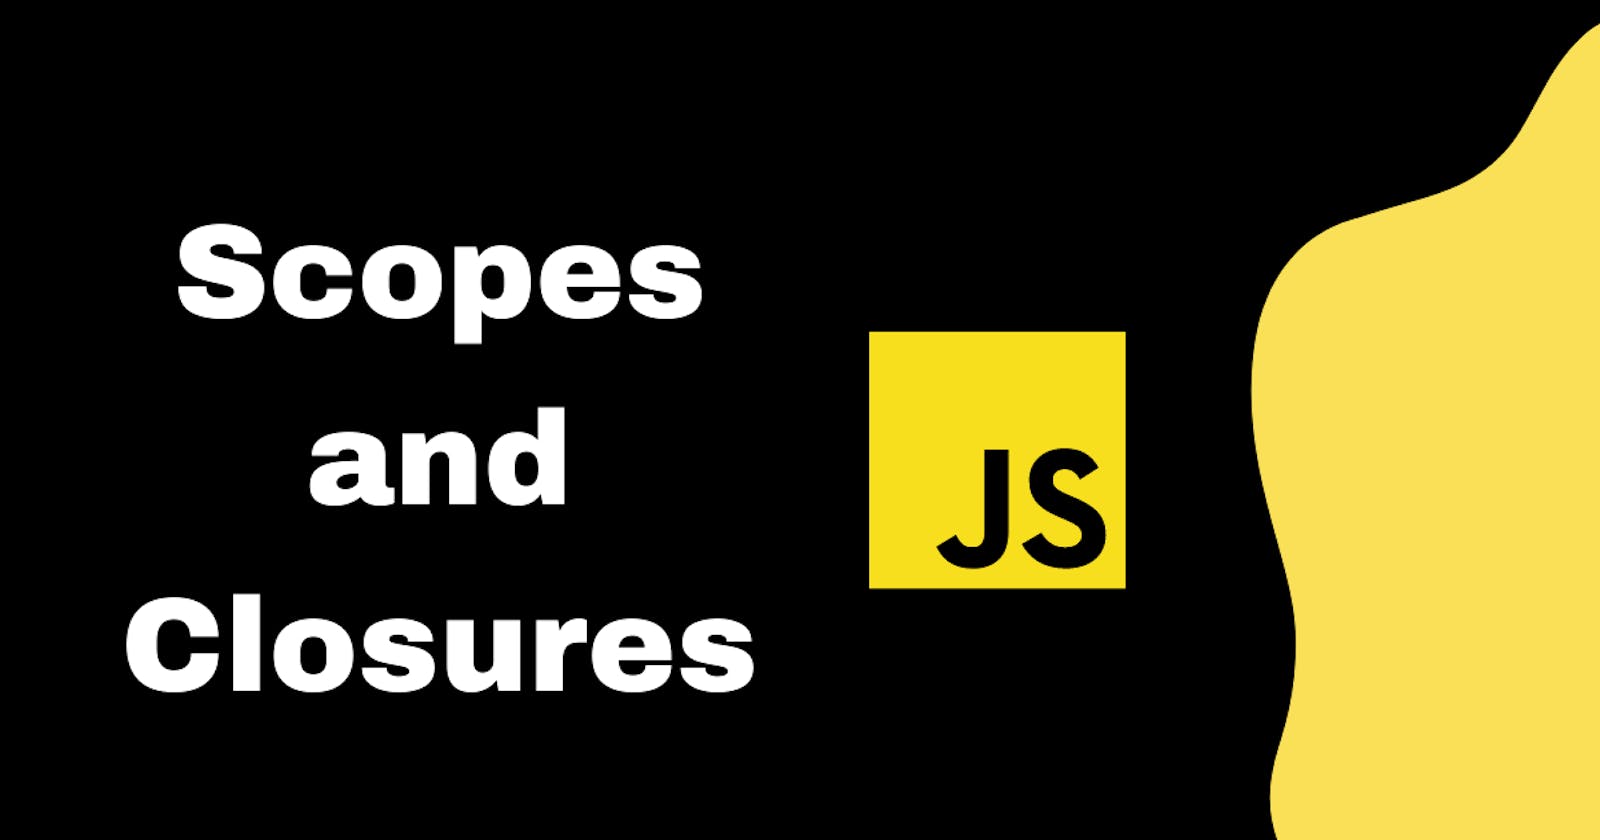 JavaScript: Let's talk about Scopes and what is a Closure